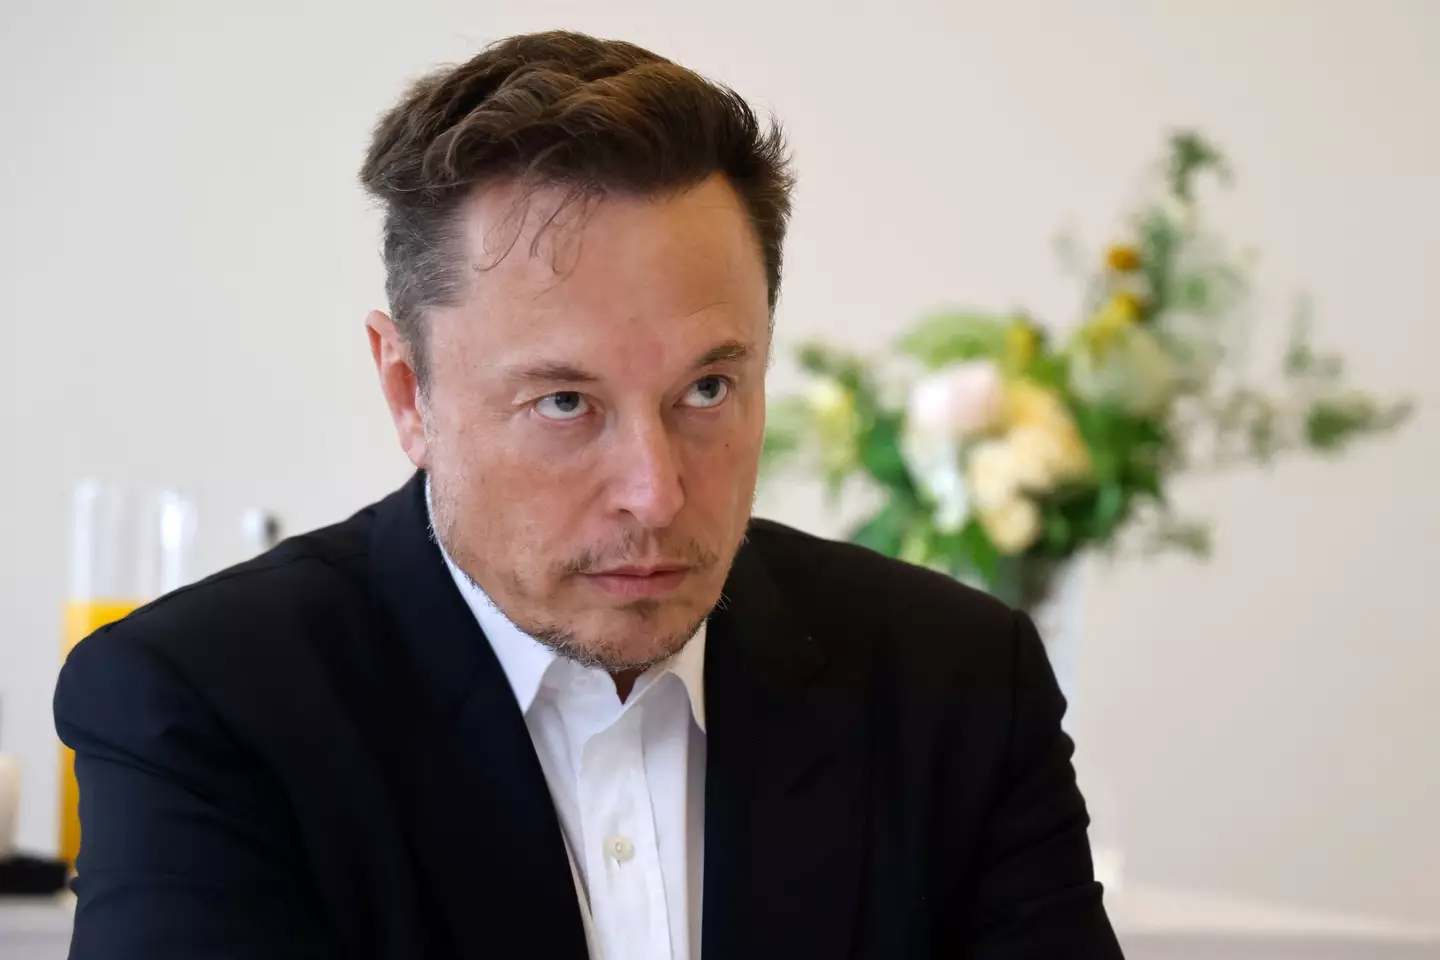 Elon Musk wants to operate on 22,000 people by 2030.